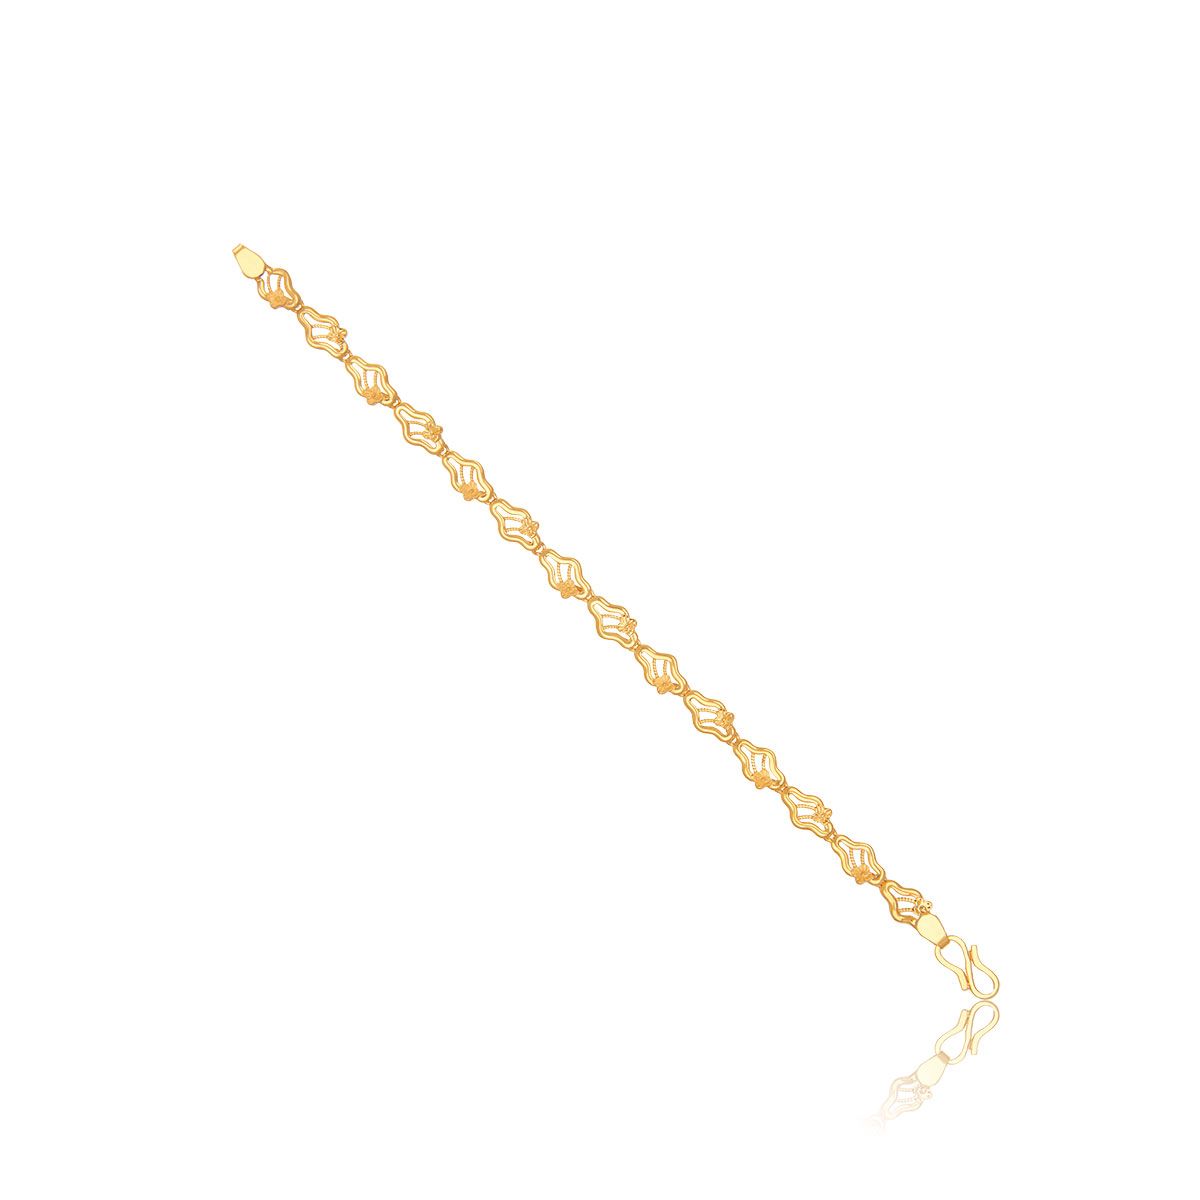 Mens Eternal Classics Twin Wide Link 24k Gold Bracelet With 18K Tibetan  Bow, Yellow Solid FINE, And Gold Accents From Aydqo, $16.69 | DHgate.Com